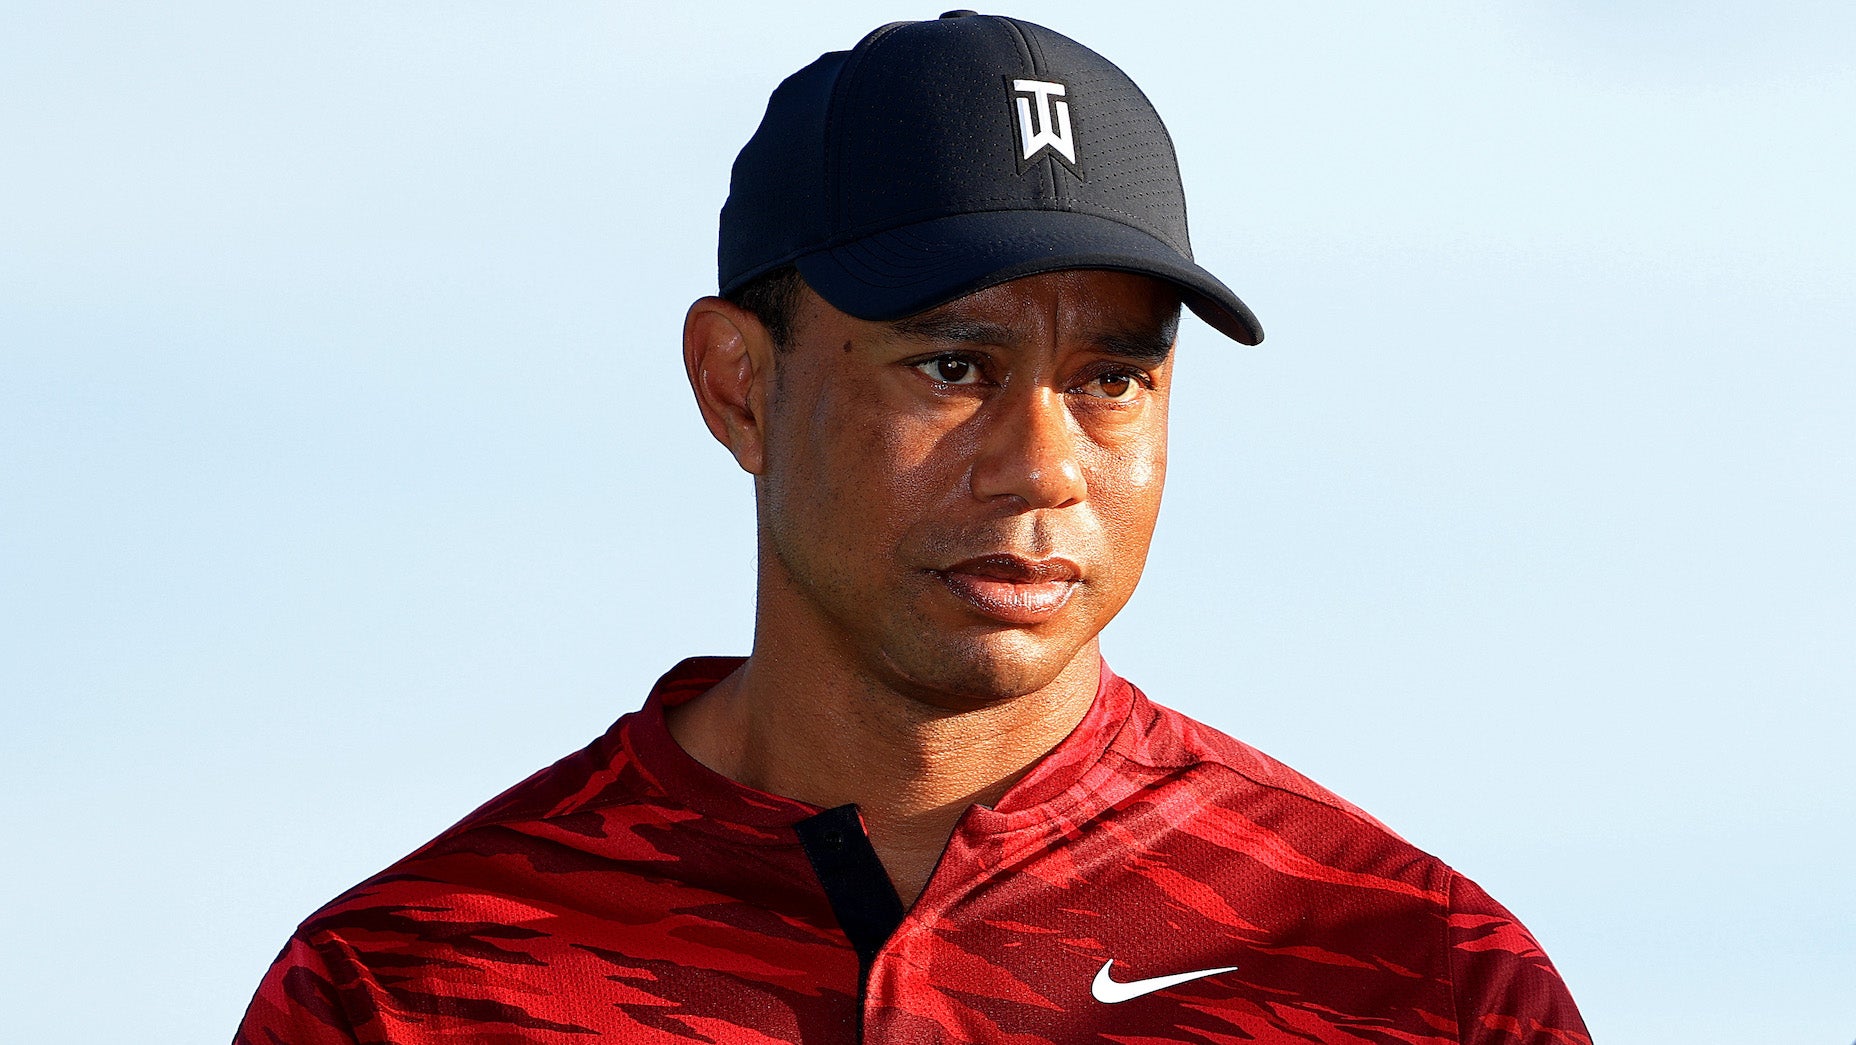 The attention paid to Tiger Woods' PNC comeback should put the entire golf world on notice.